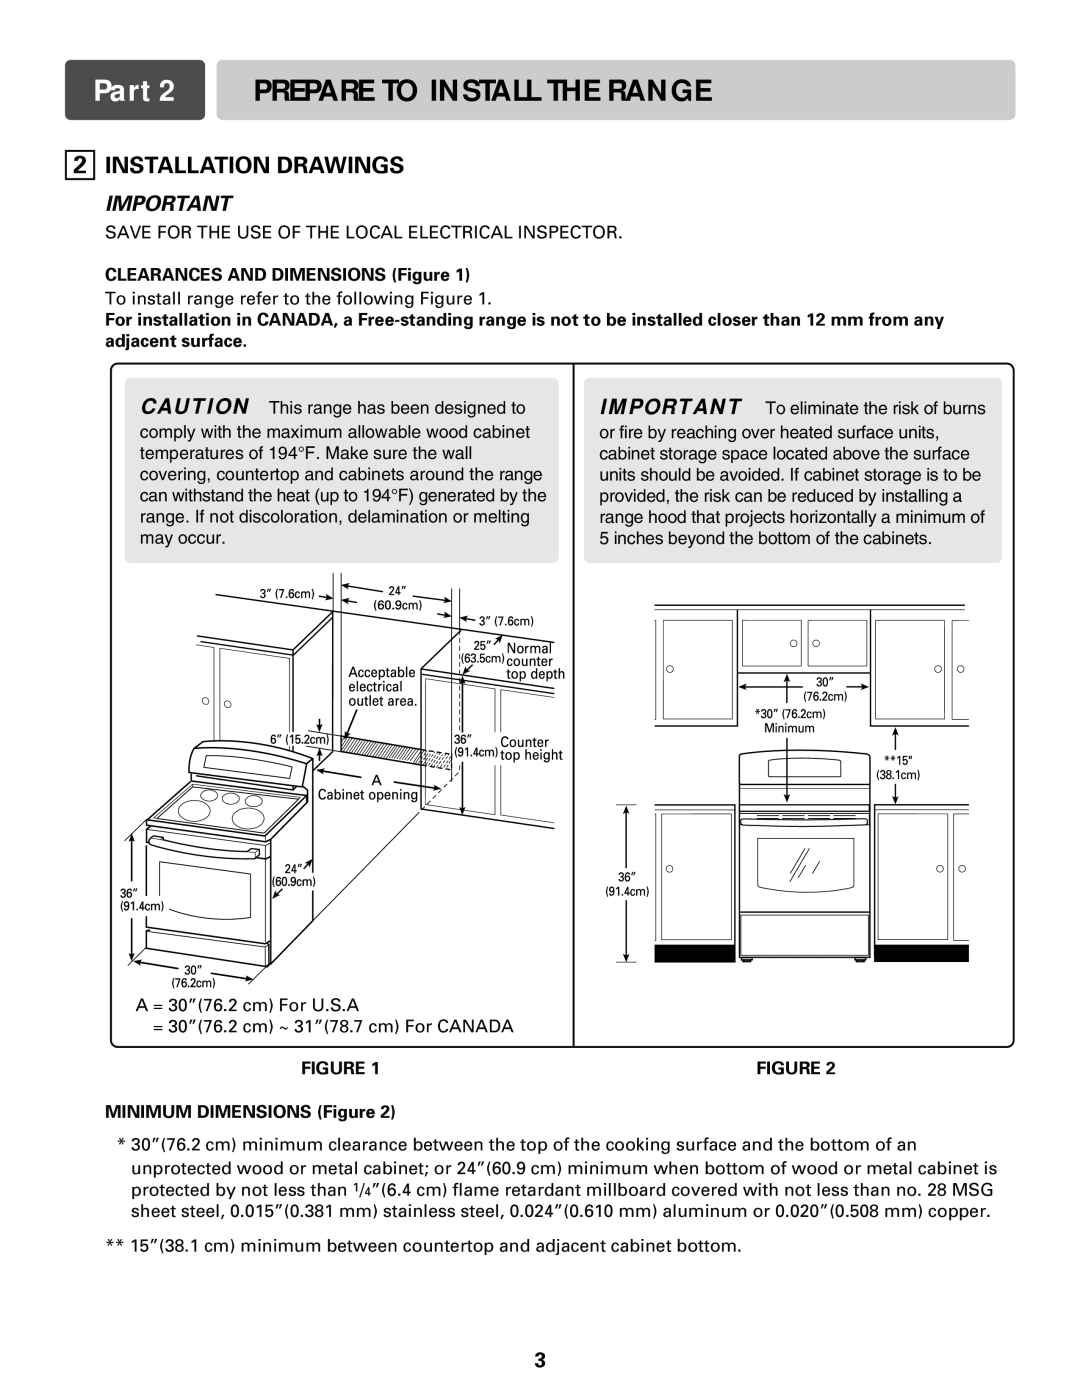 LG Electronics LRE30451S Part 2 PREPARE TO INSTALL THE RANGE, Installation Drawings, CLEARANCES AND DIMENSIONS Figure 